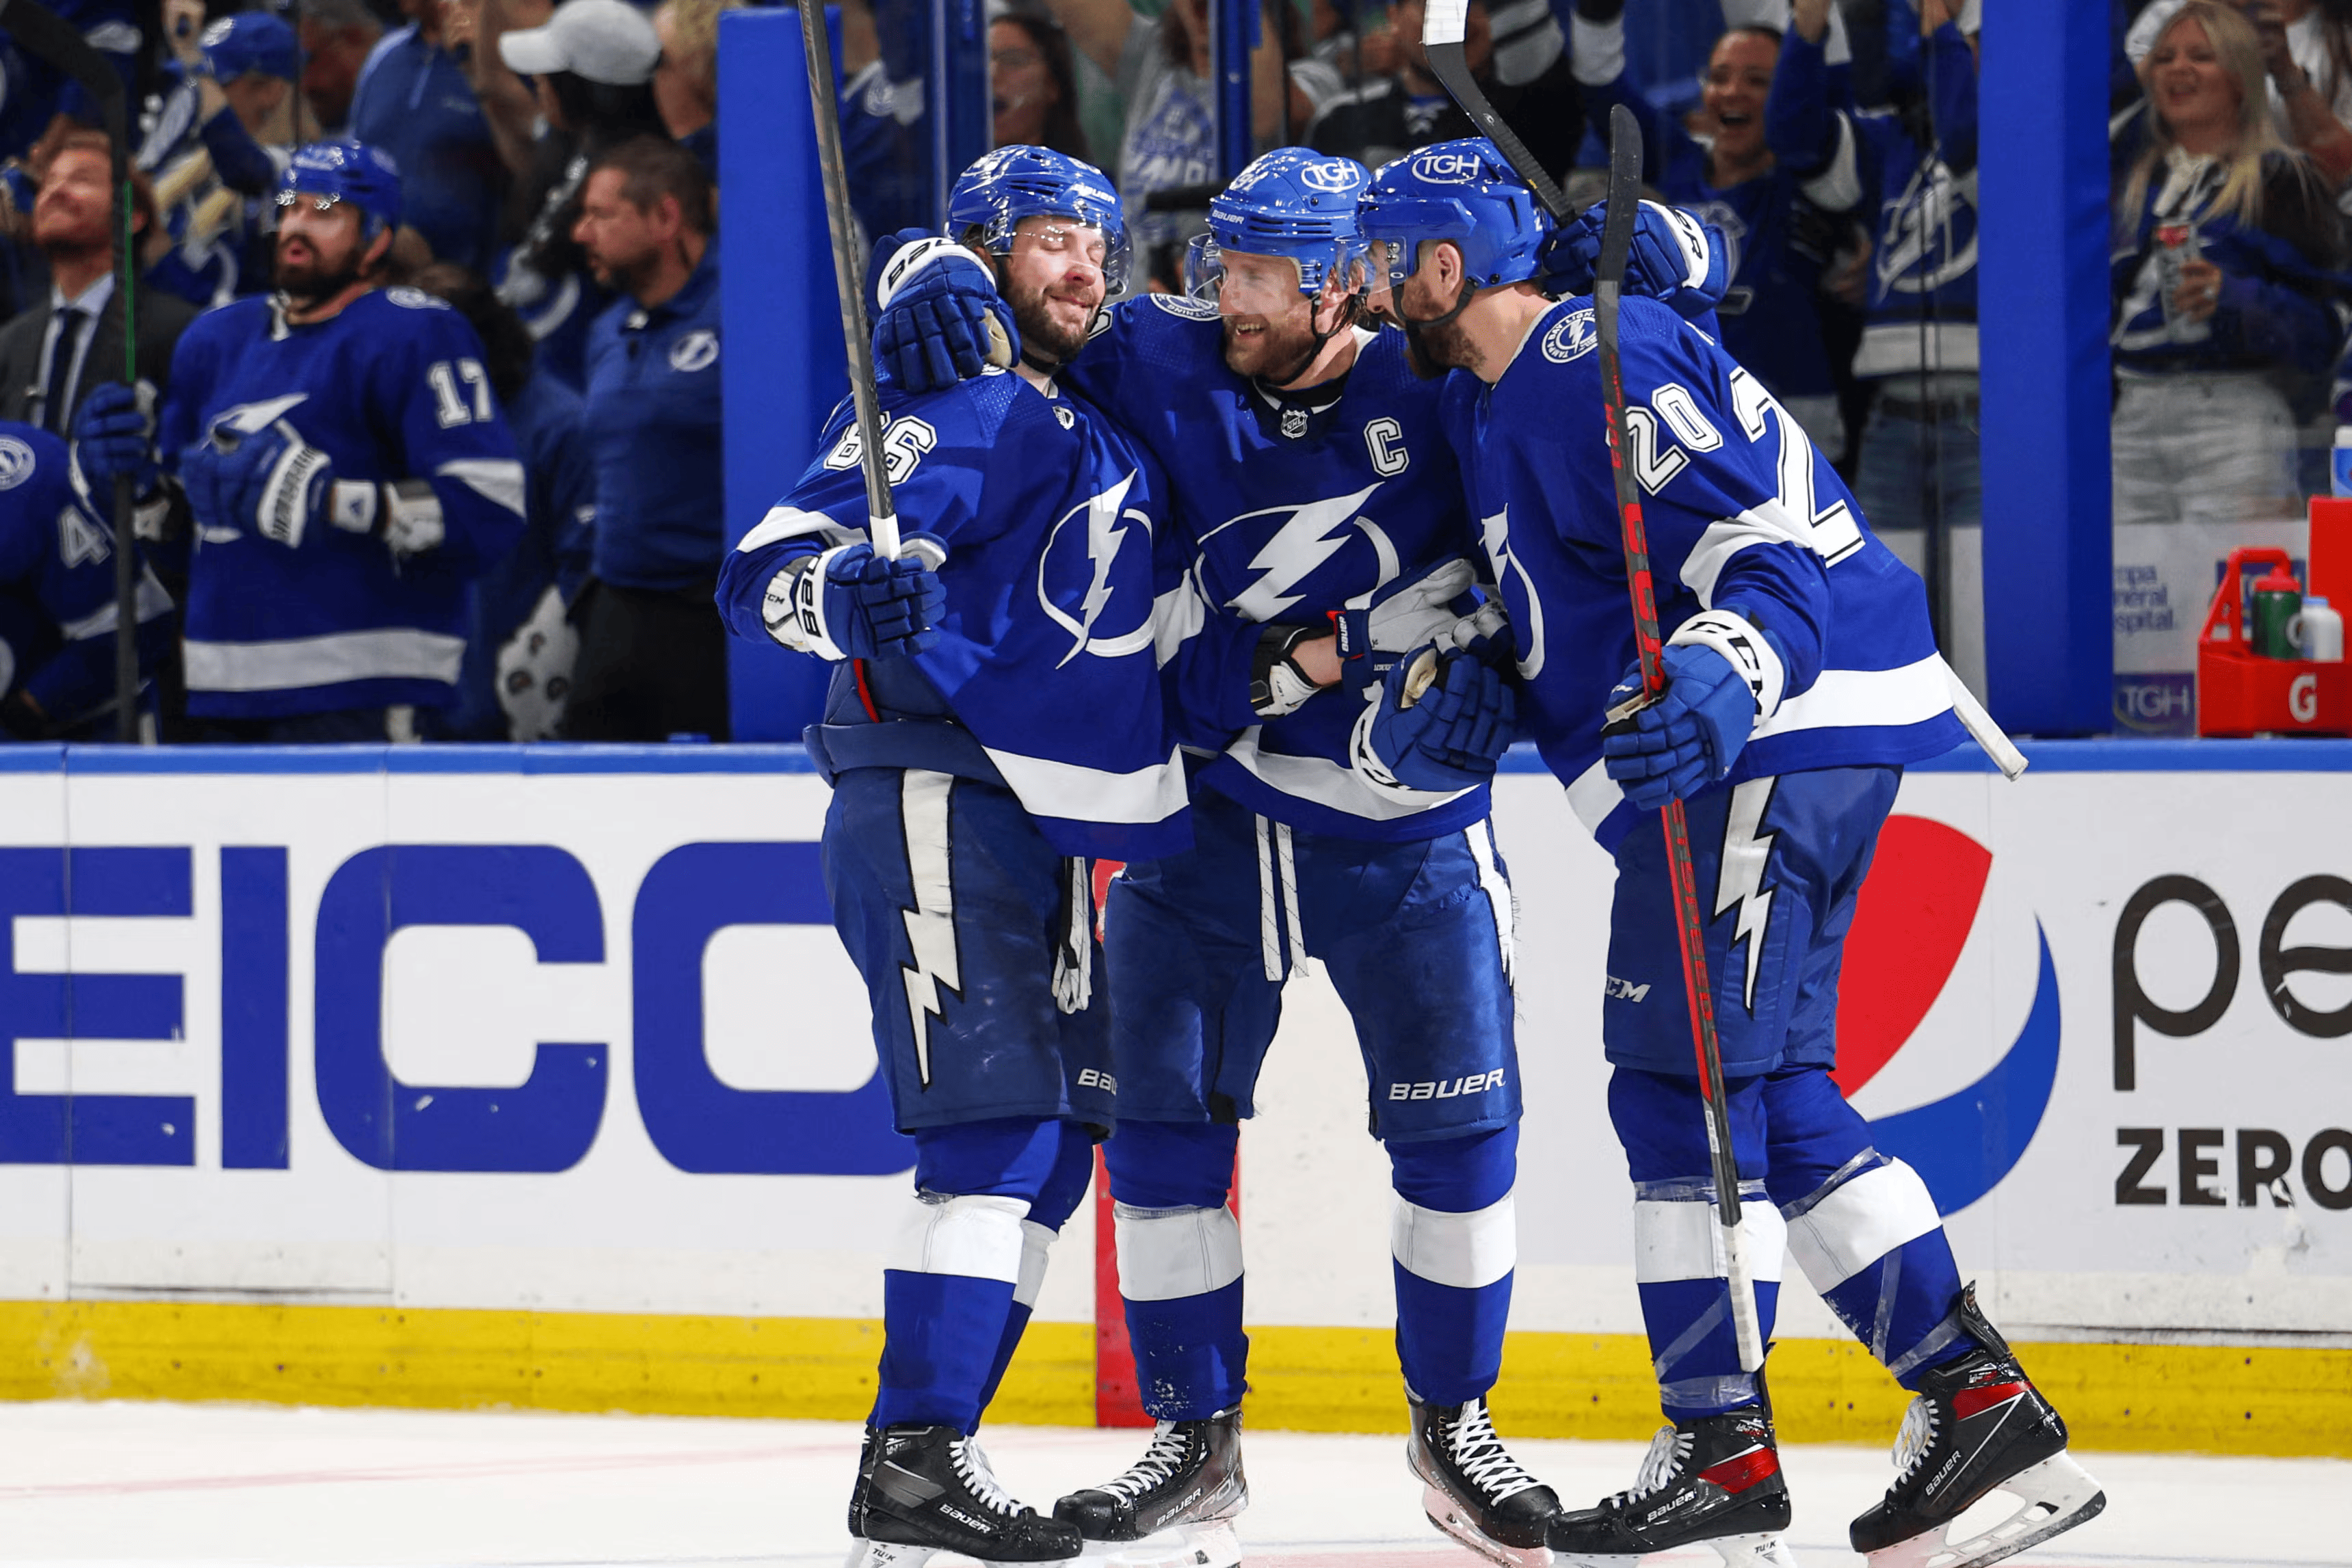 Just Now: “Tampa Bay Lightning Remain Unyielding Despite Challenges”